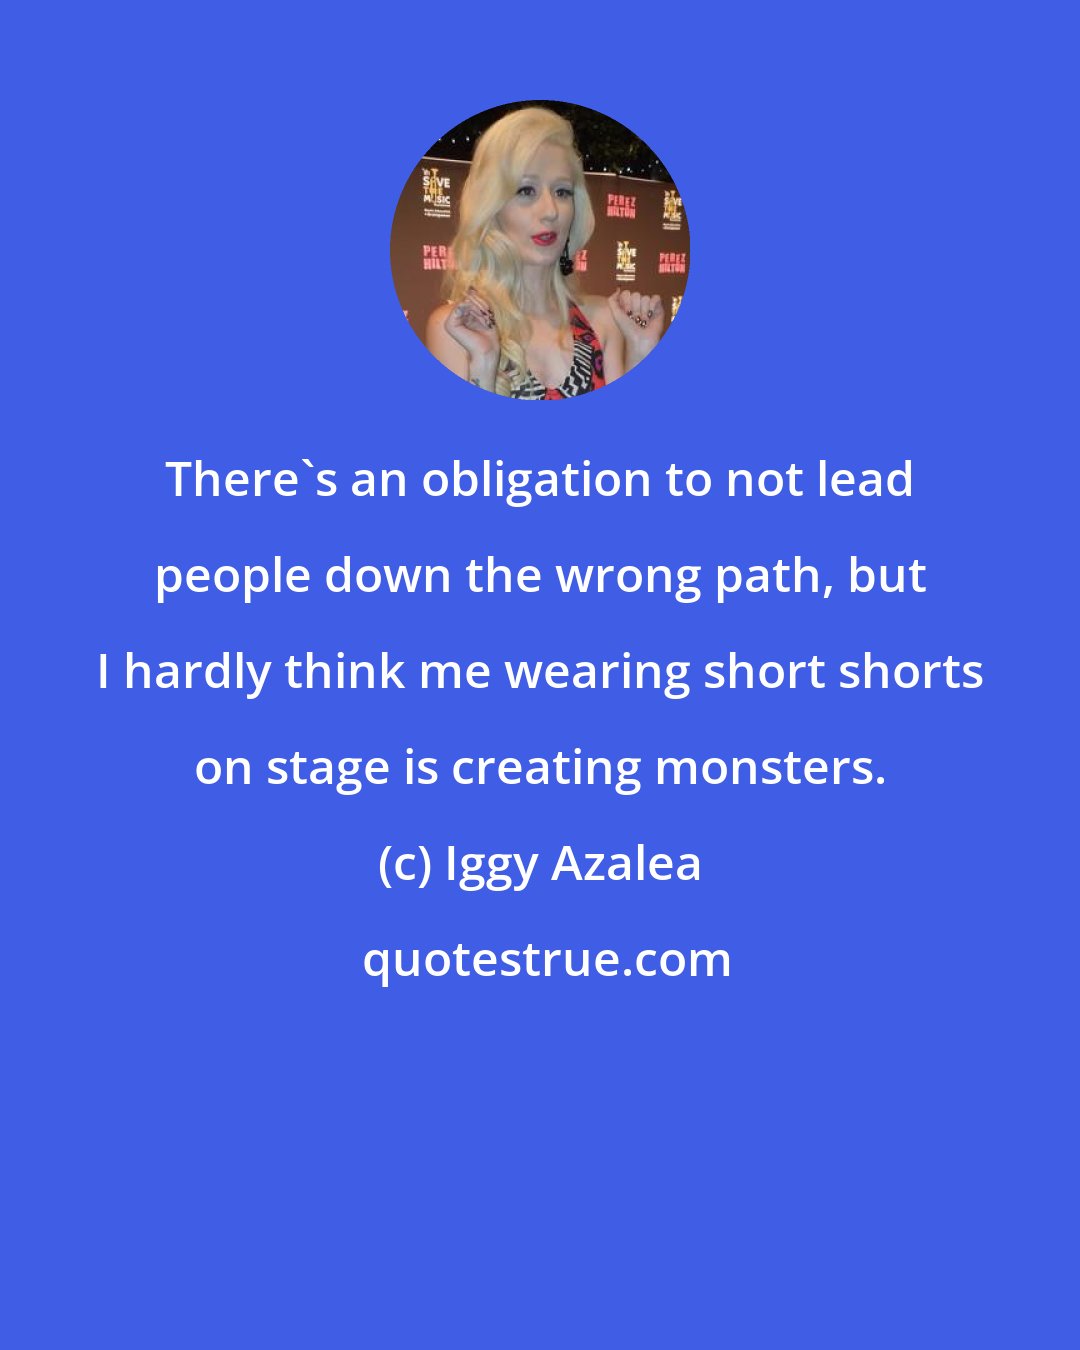 Iggy Azalea: There's an obligation to not lead people down the wrong path, but I hardly think me wearing short shorts on stage is creating monsters.